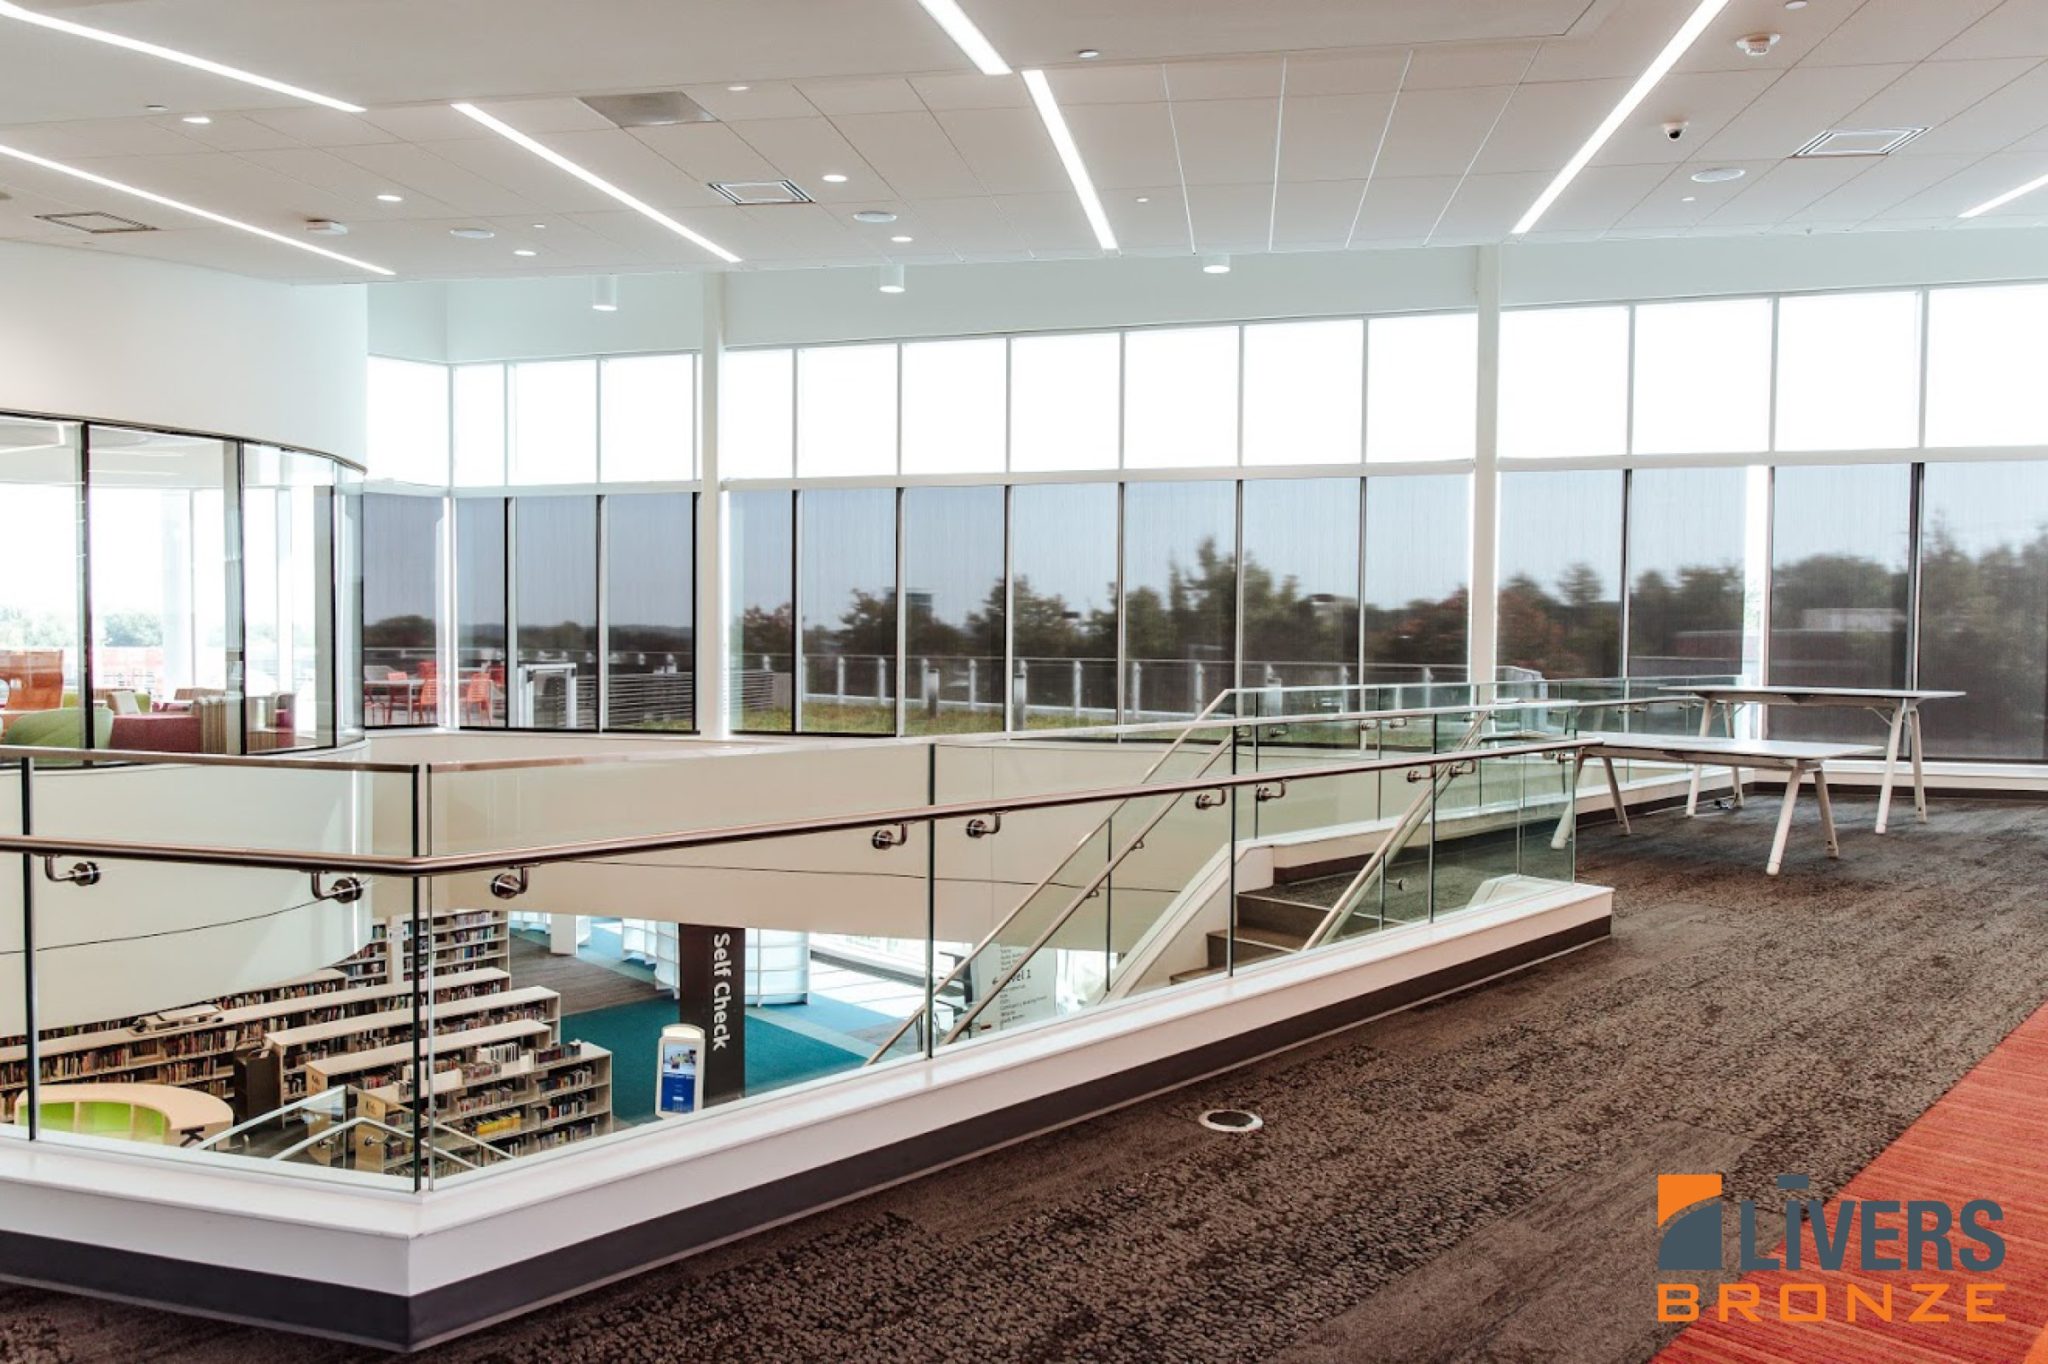 Livers Bronze Struct-U-Rail Commercial Glass Railing system installed at the lobby stair and interior balcony at the Monticello Public Library, Shawnee, Kansas, and is Made in the USA.